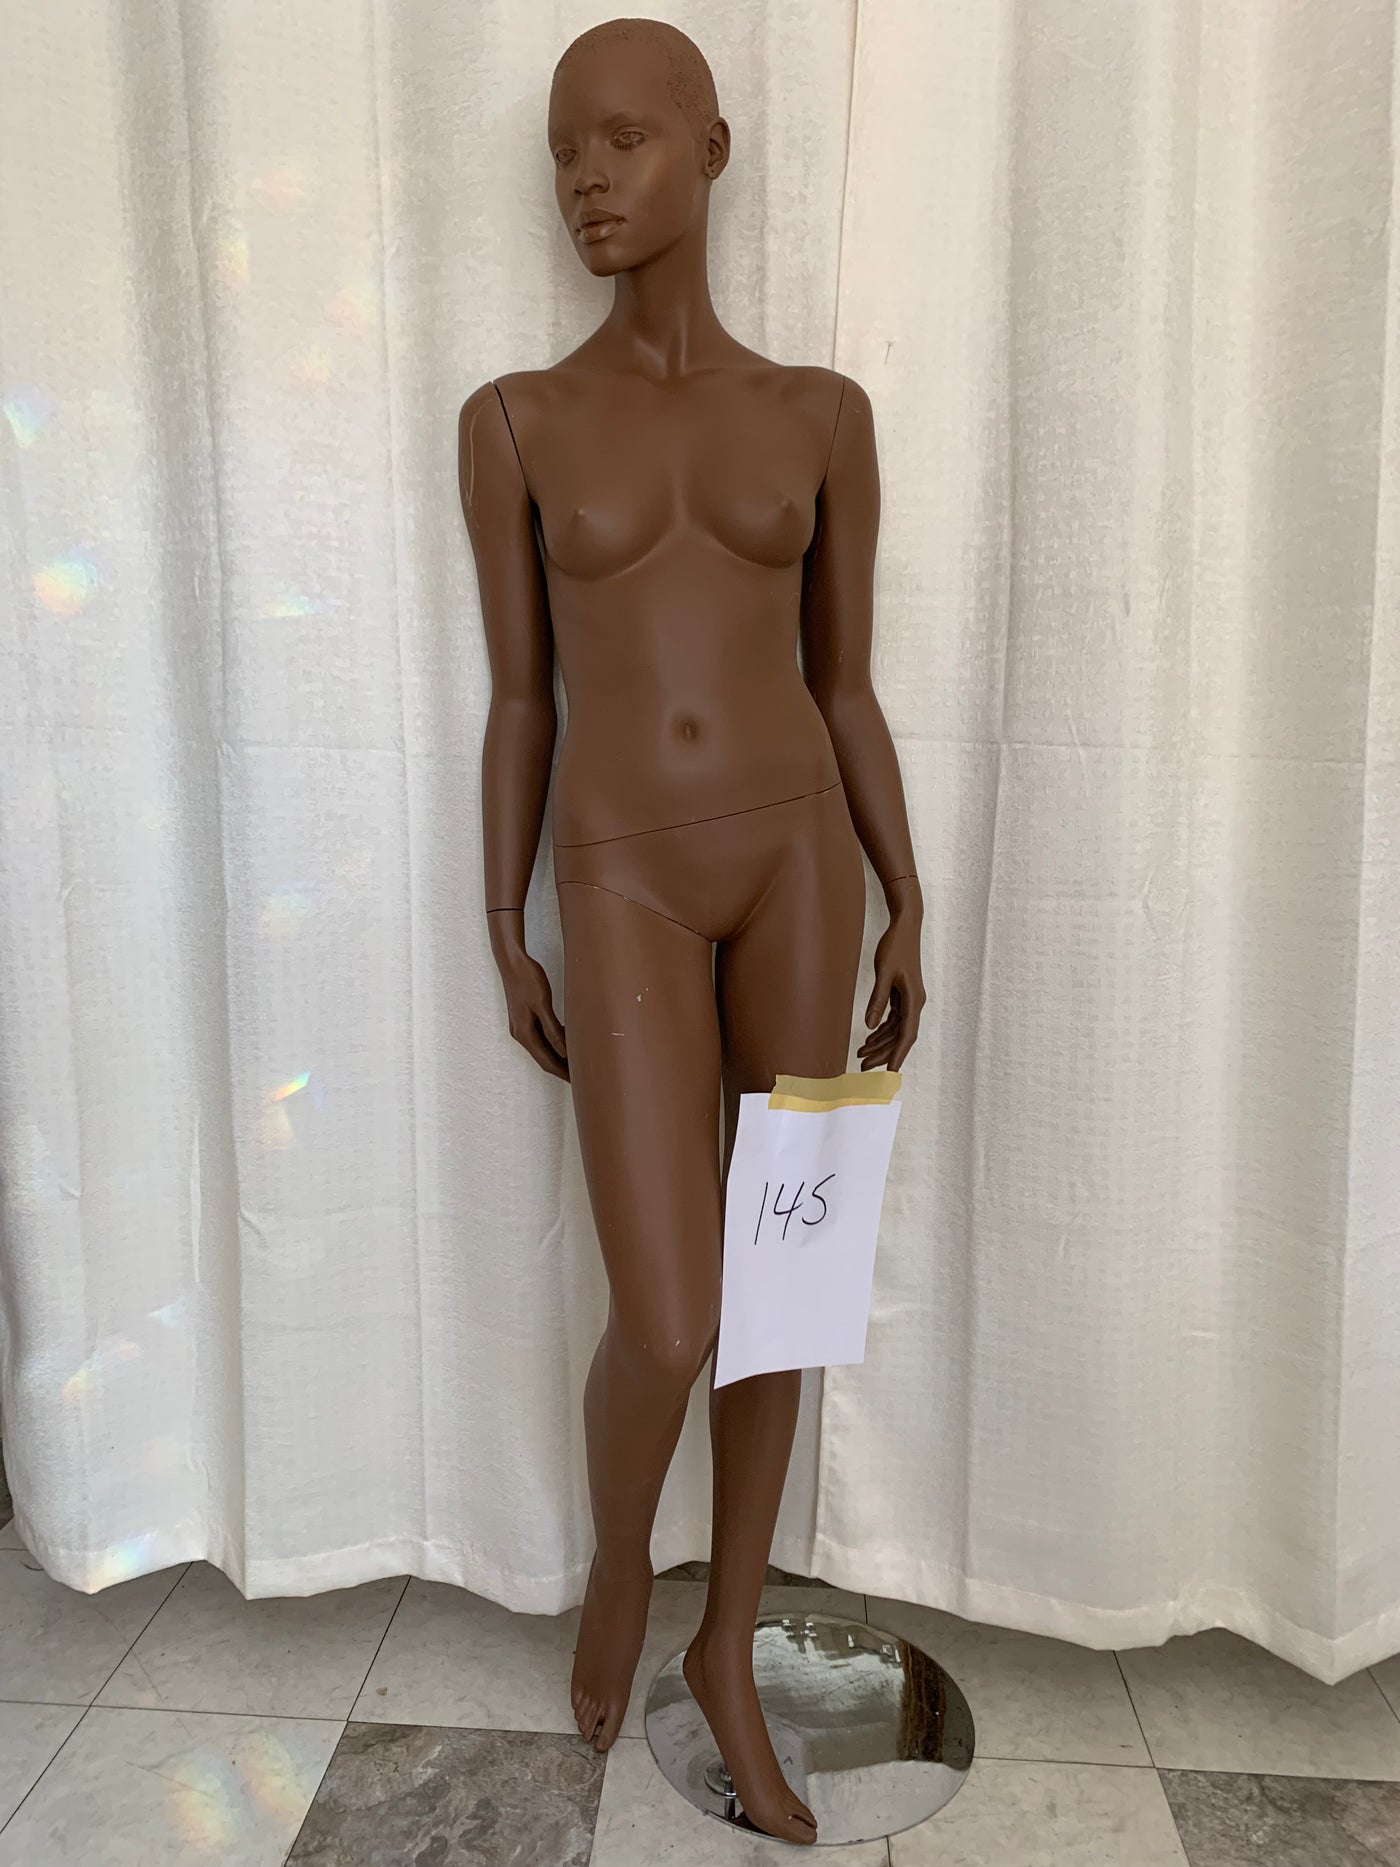 Used Female Adel Rootstein Mannequin #145 - Nomad